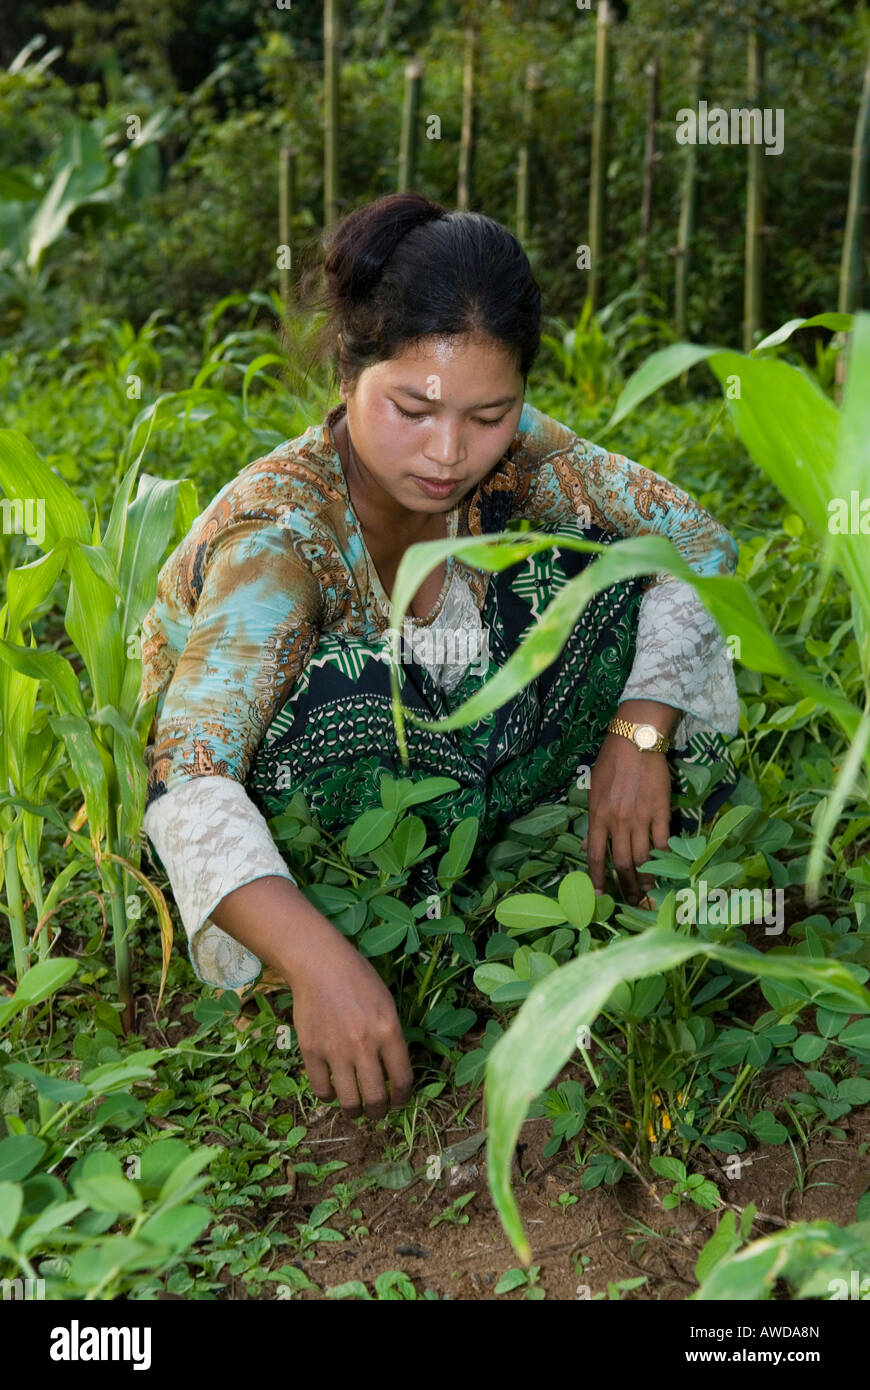 Farmers woman at field work, Koh Kong Province, Cambodia Stock Photo